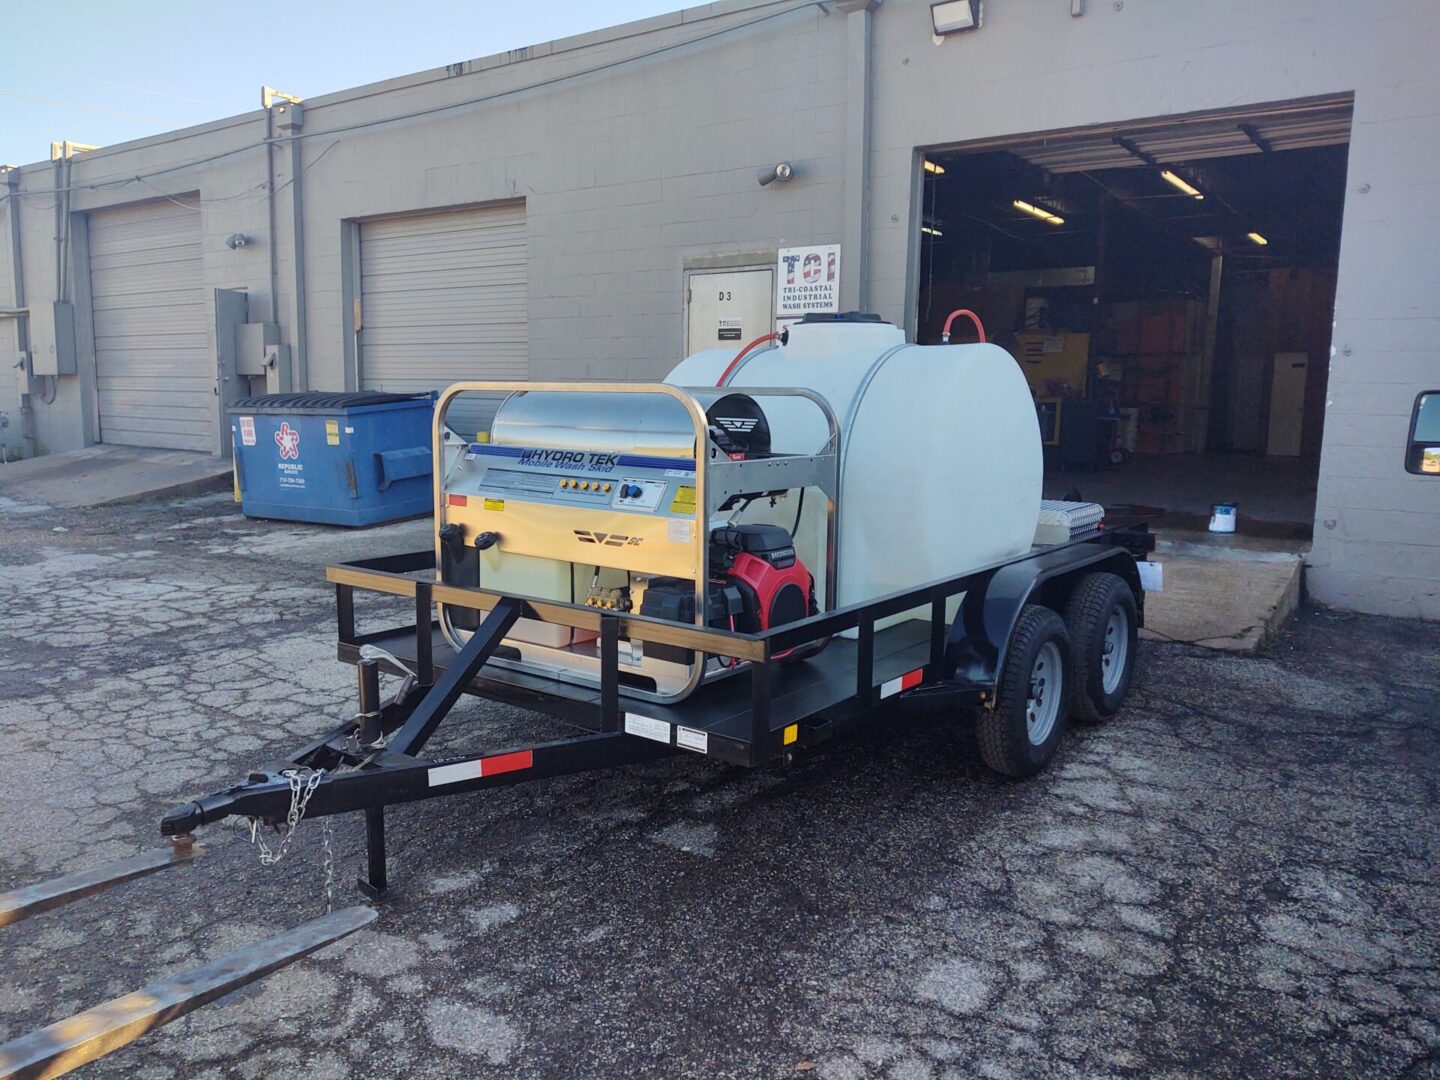 A trailer with industrial cleaning equipment and a power generator parked outside an industrial garage.